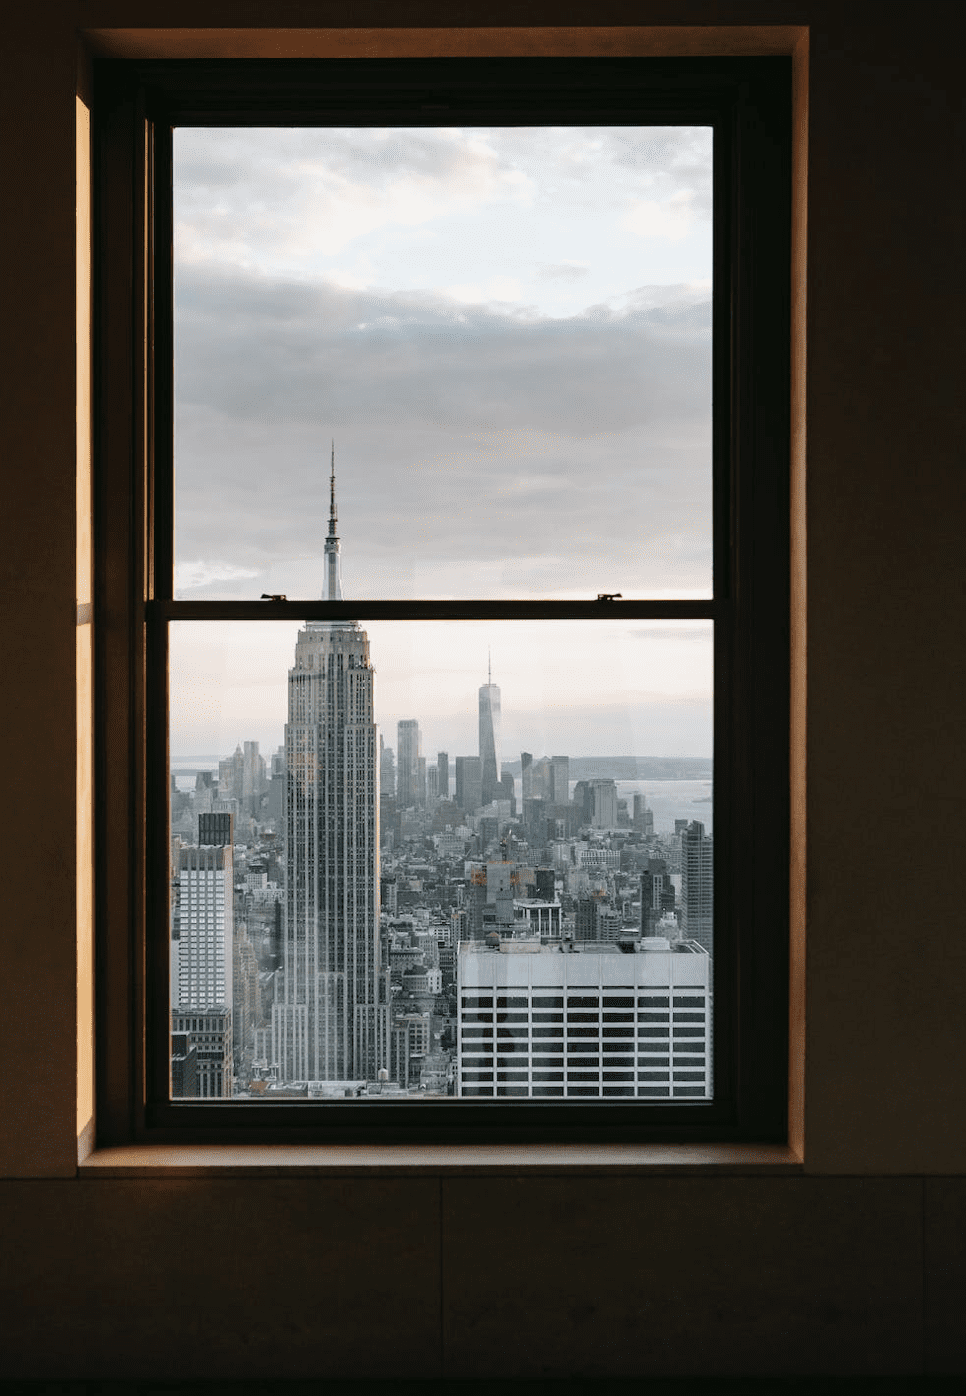 where to stay in new york